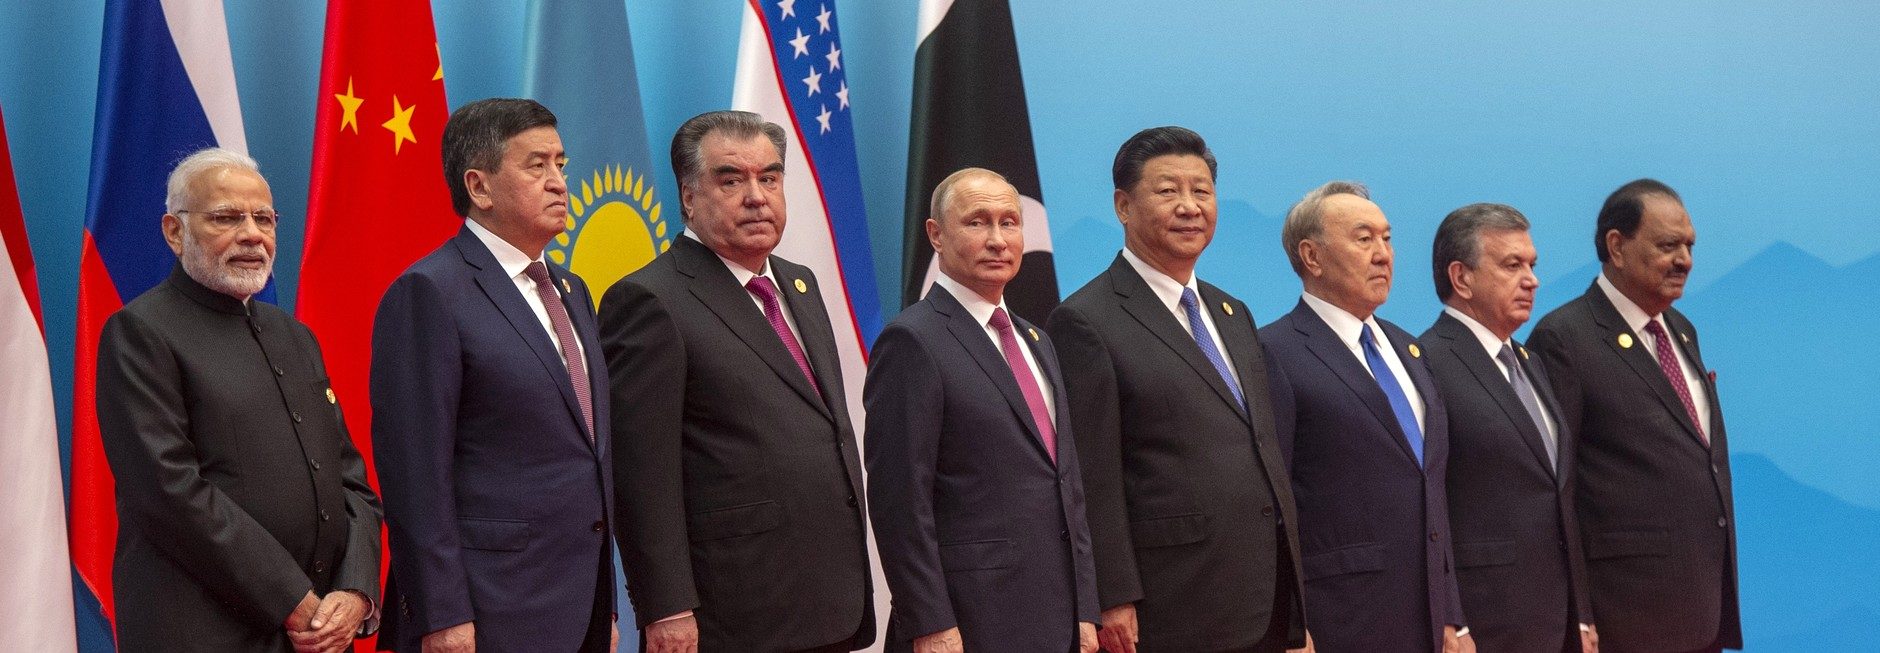 Organization of Rivals: Limits of the Shanghai Cooperation Organization